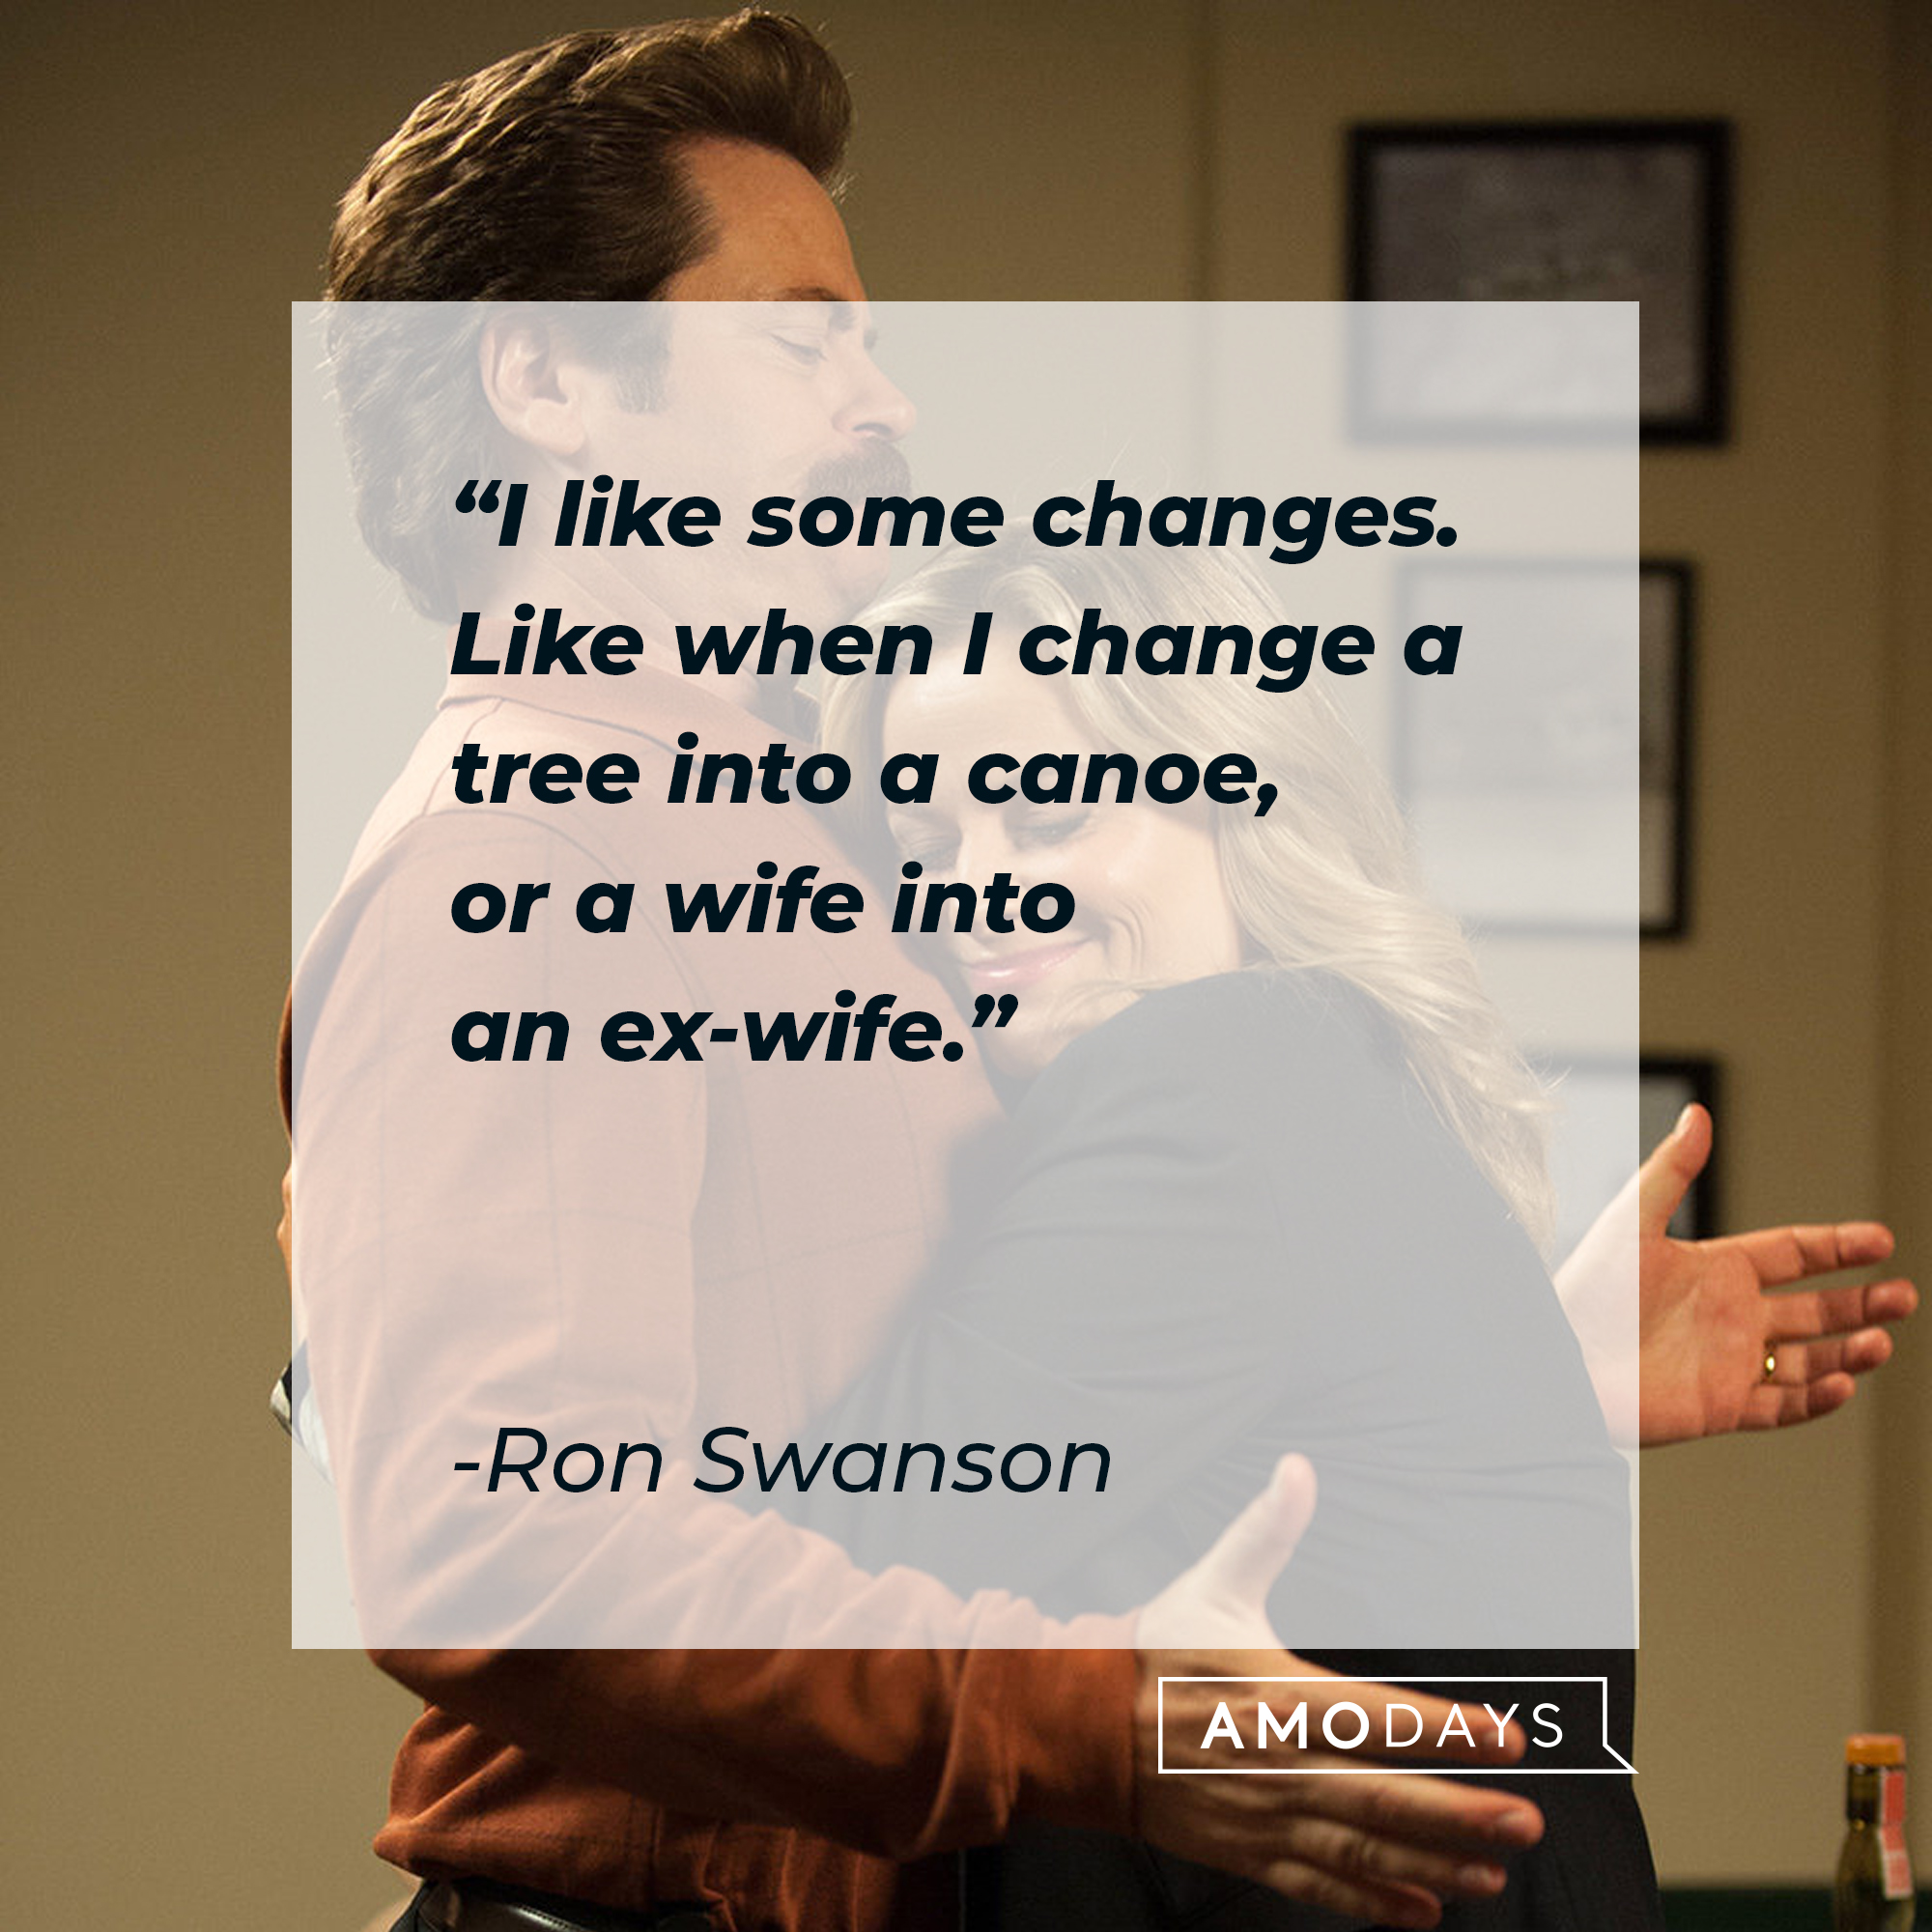 Ron Swanson’s quote: "I like some changes. Like when I change a tree into a canoe, or a wife into an ex-wife." | Image: Facebook.com/parksandrecreation